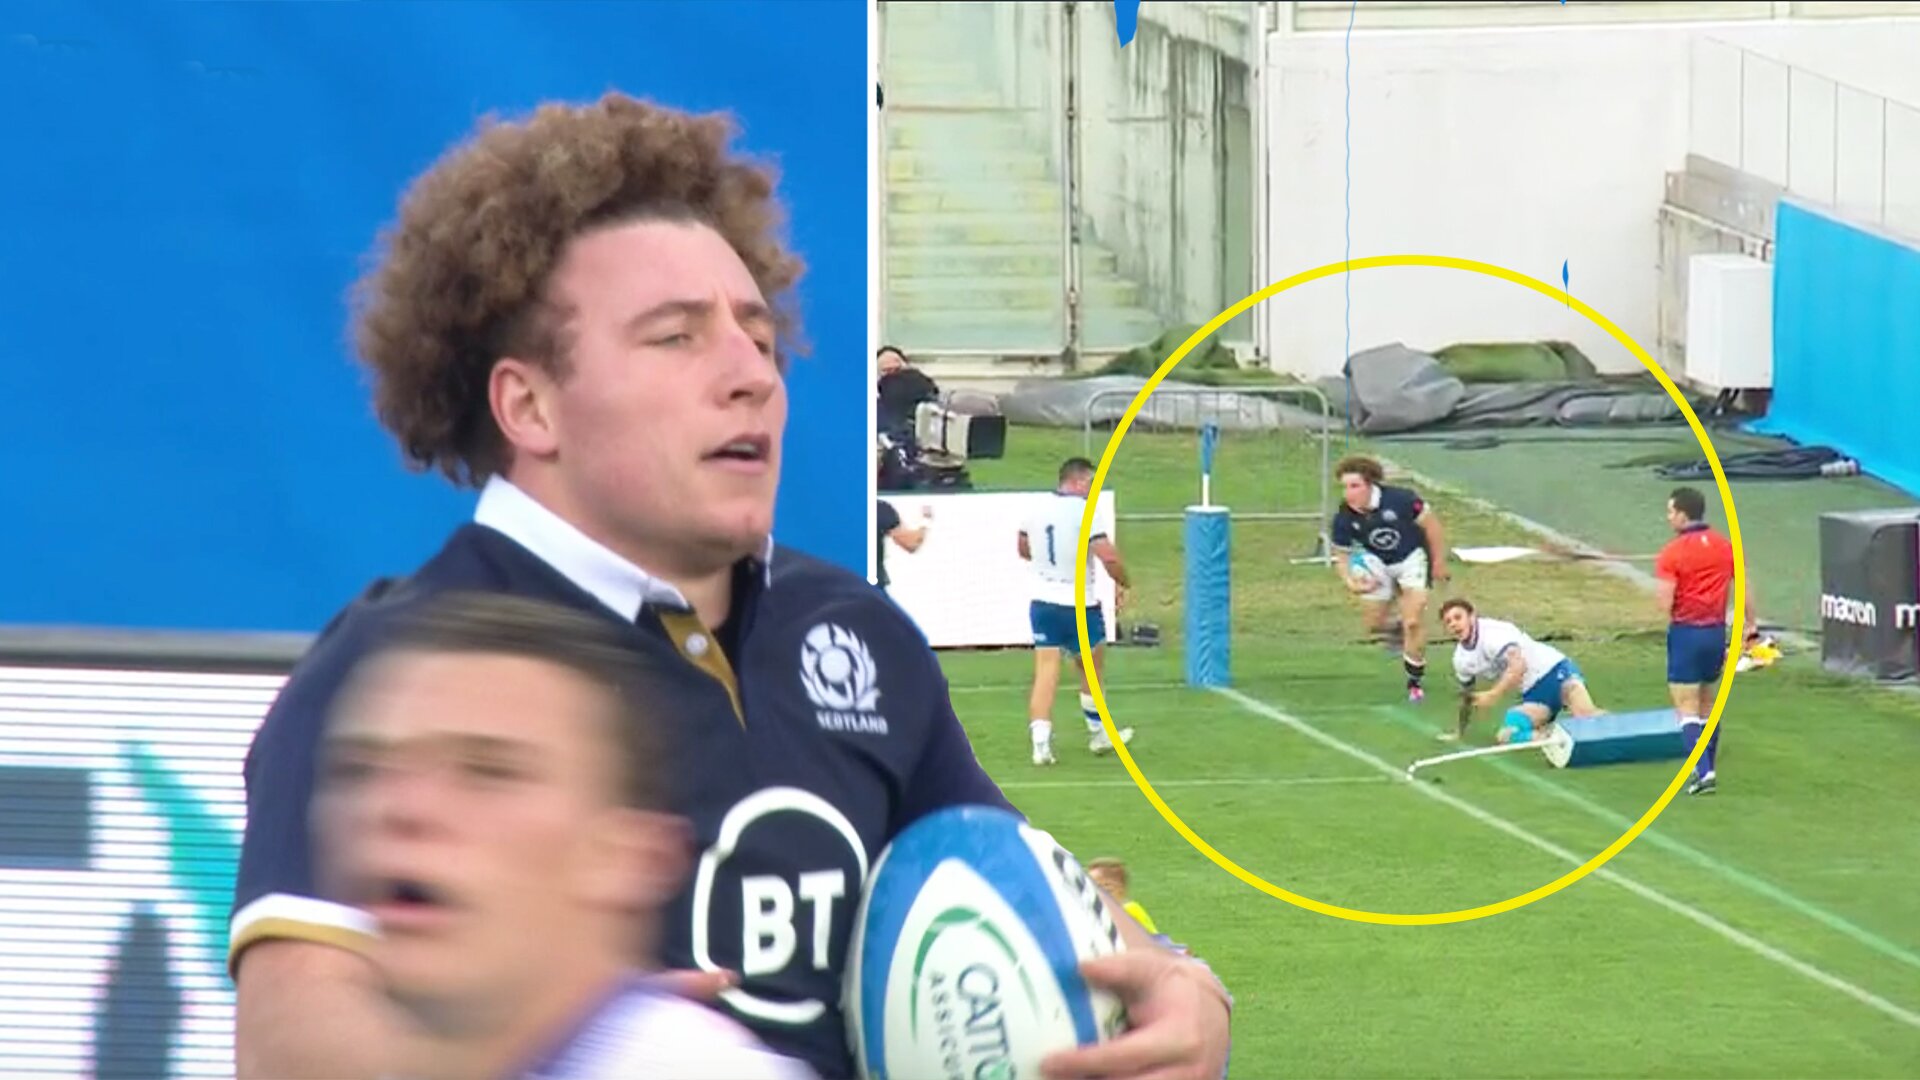 Duncan Weir cements his status as world's best fly-half after magnificent score on Scotland return